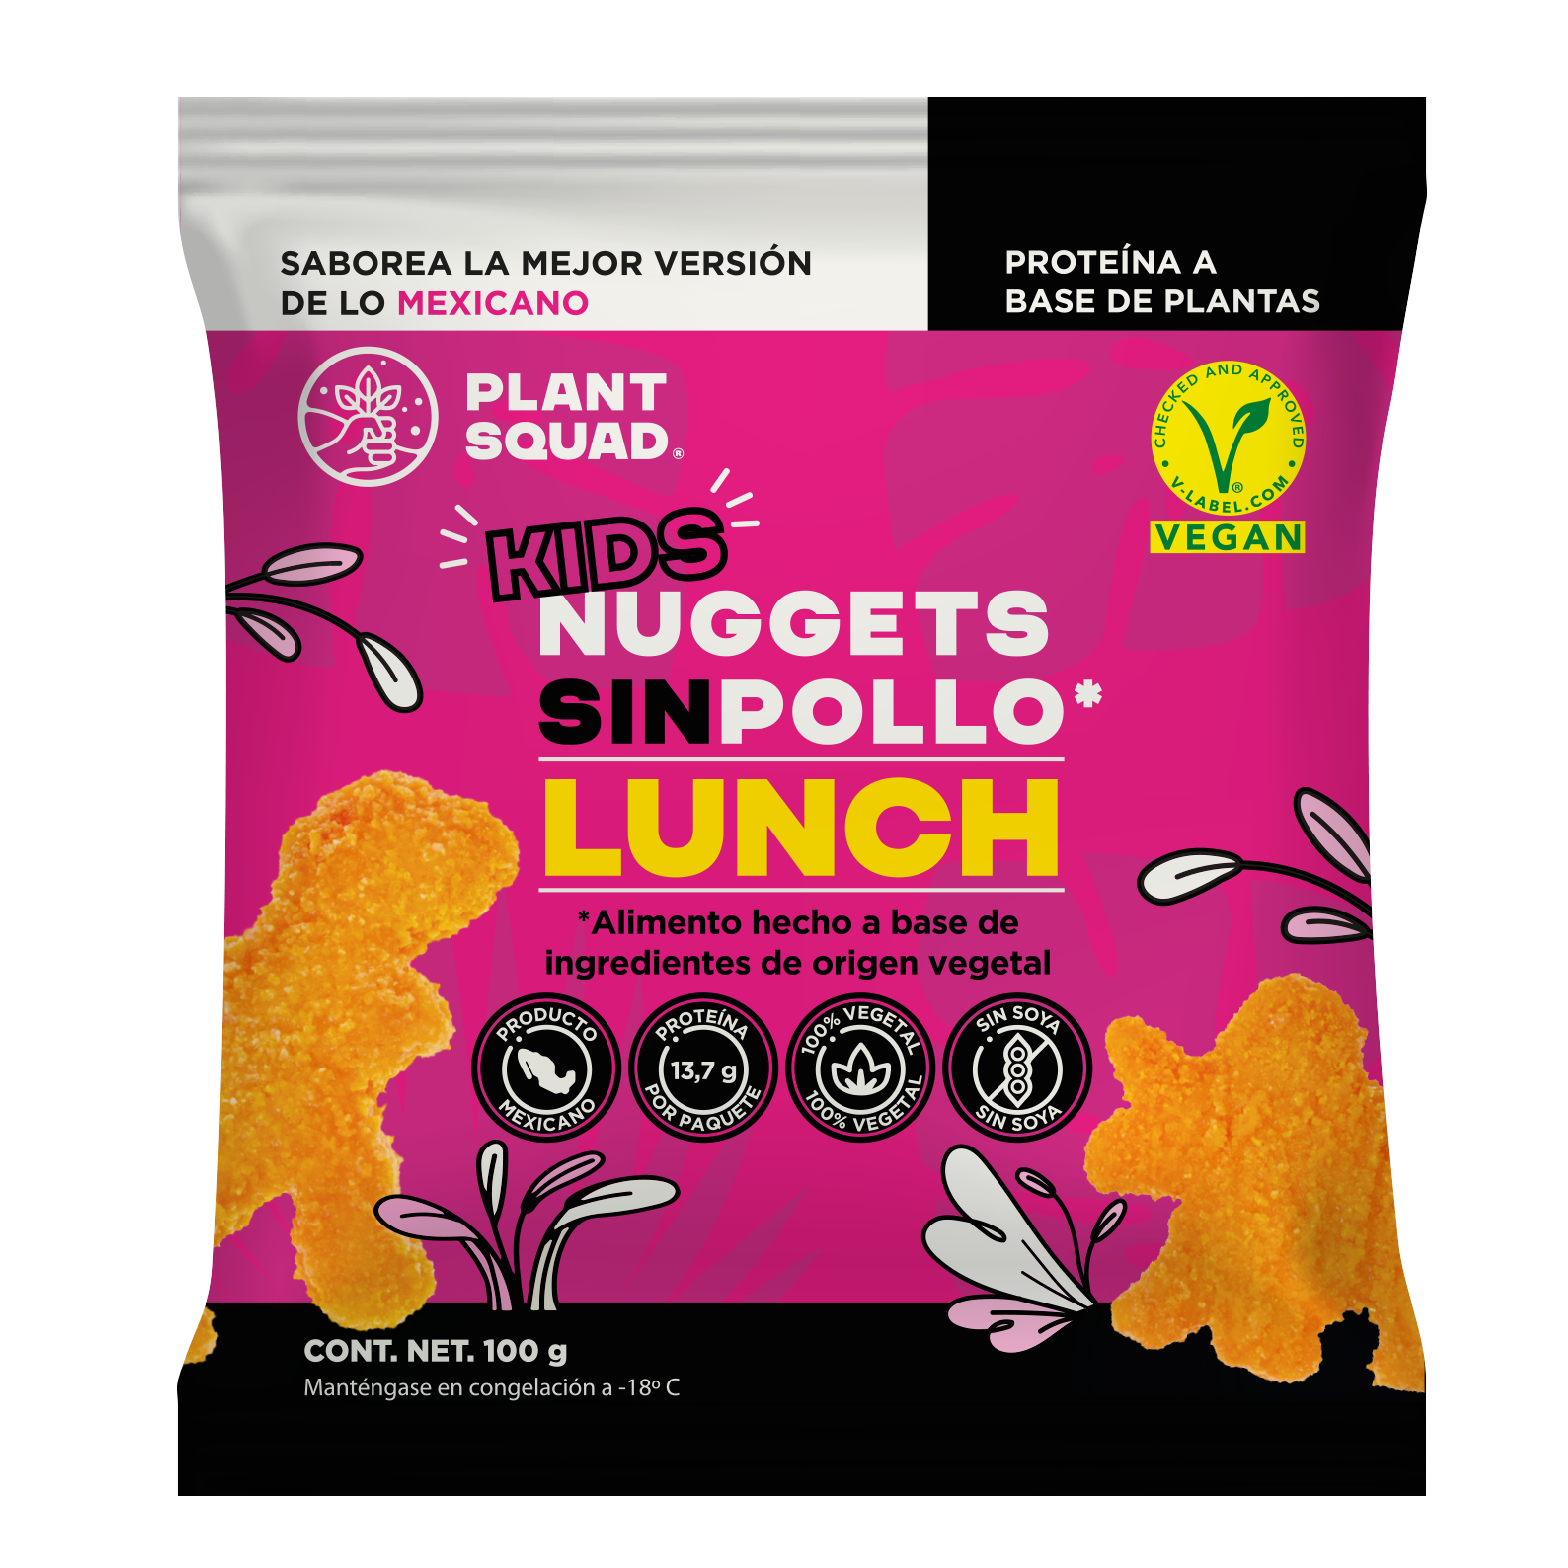 Nuggets SINPOLLO Lunch 5 Pack 100g each